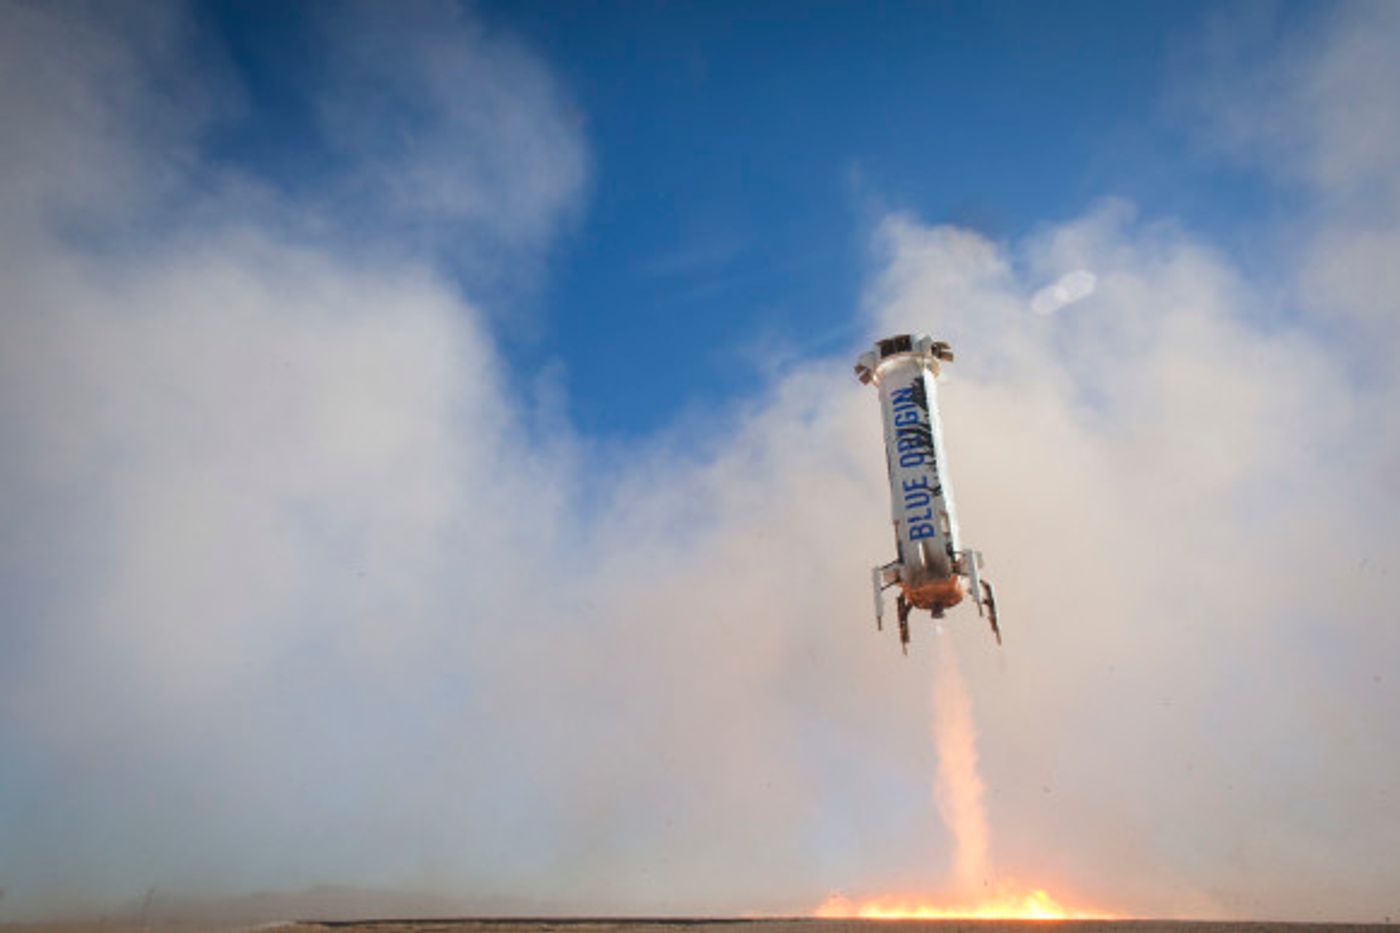 Blue Origin has landed its New Shepard rocket for the third time in a row.